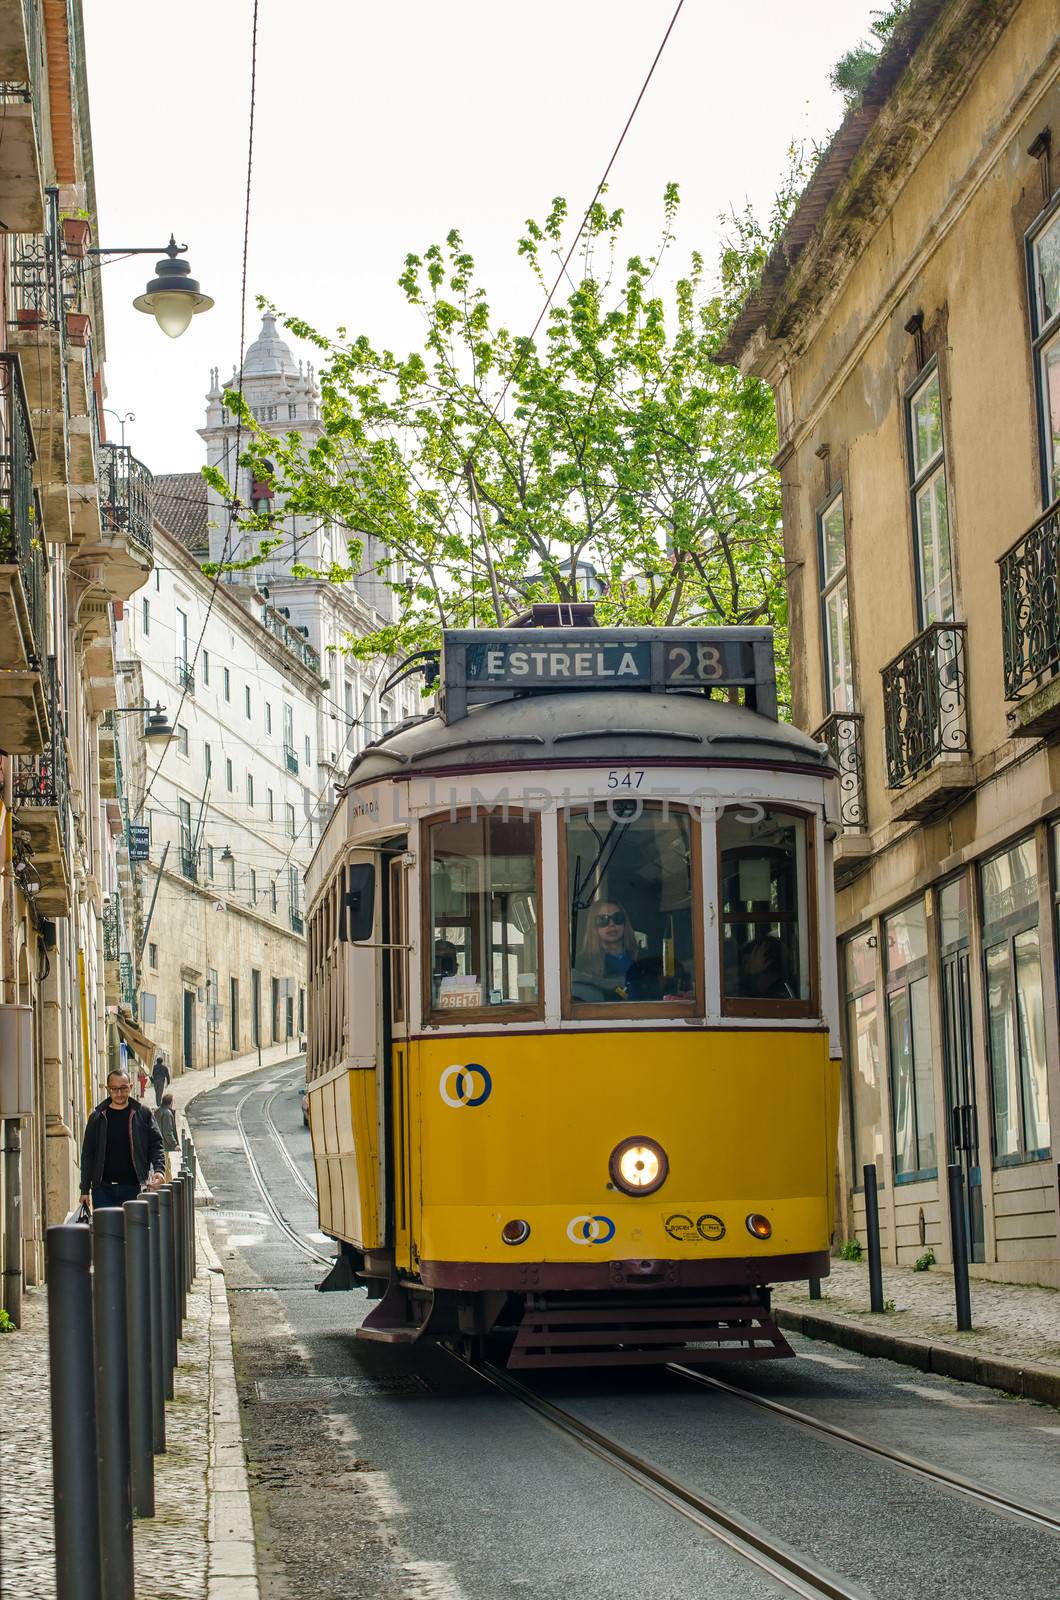 LISBON, PORTUGAL - APRIL 8: A traditional tram is making its way through a narrow street in Lisbon, Portugal on April 8, 2013. The five urban tramway lines mainly serve as a tourist attraction.